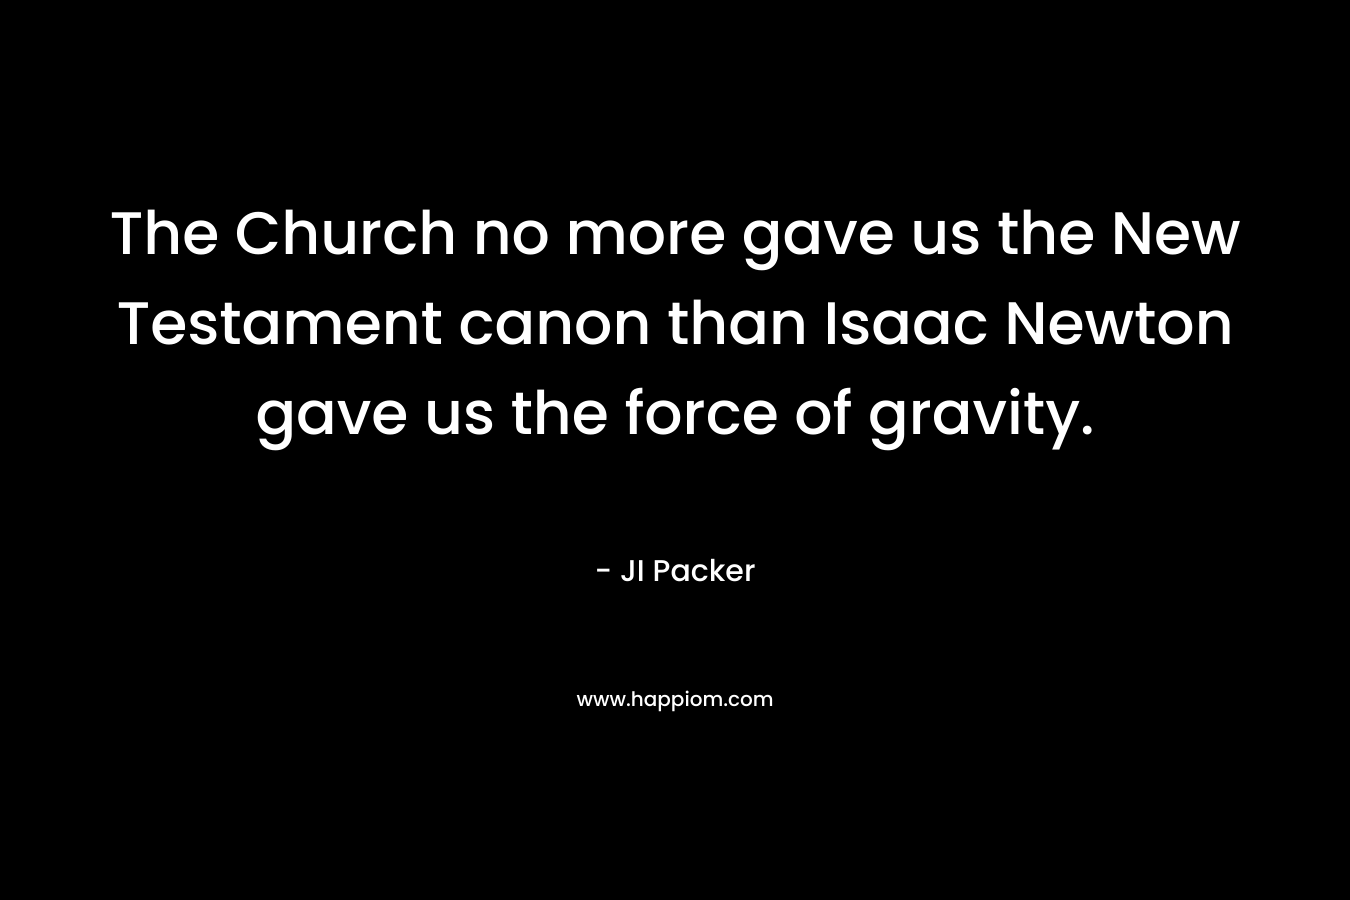 The Church no more gave us the New Testament canon than Isaac Newton gave us the force of gravity. – JI Packer